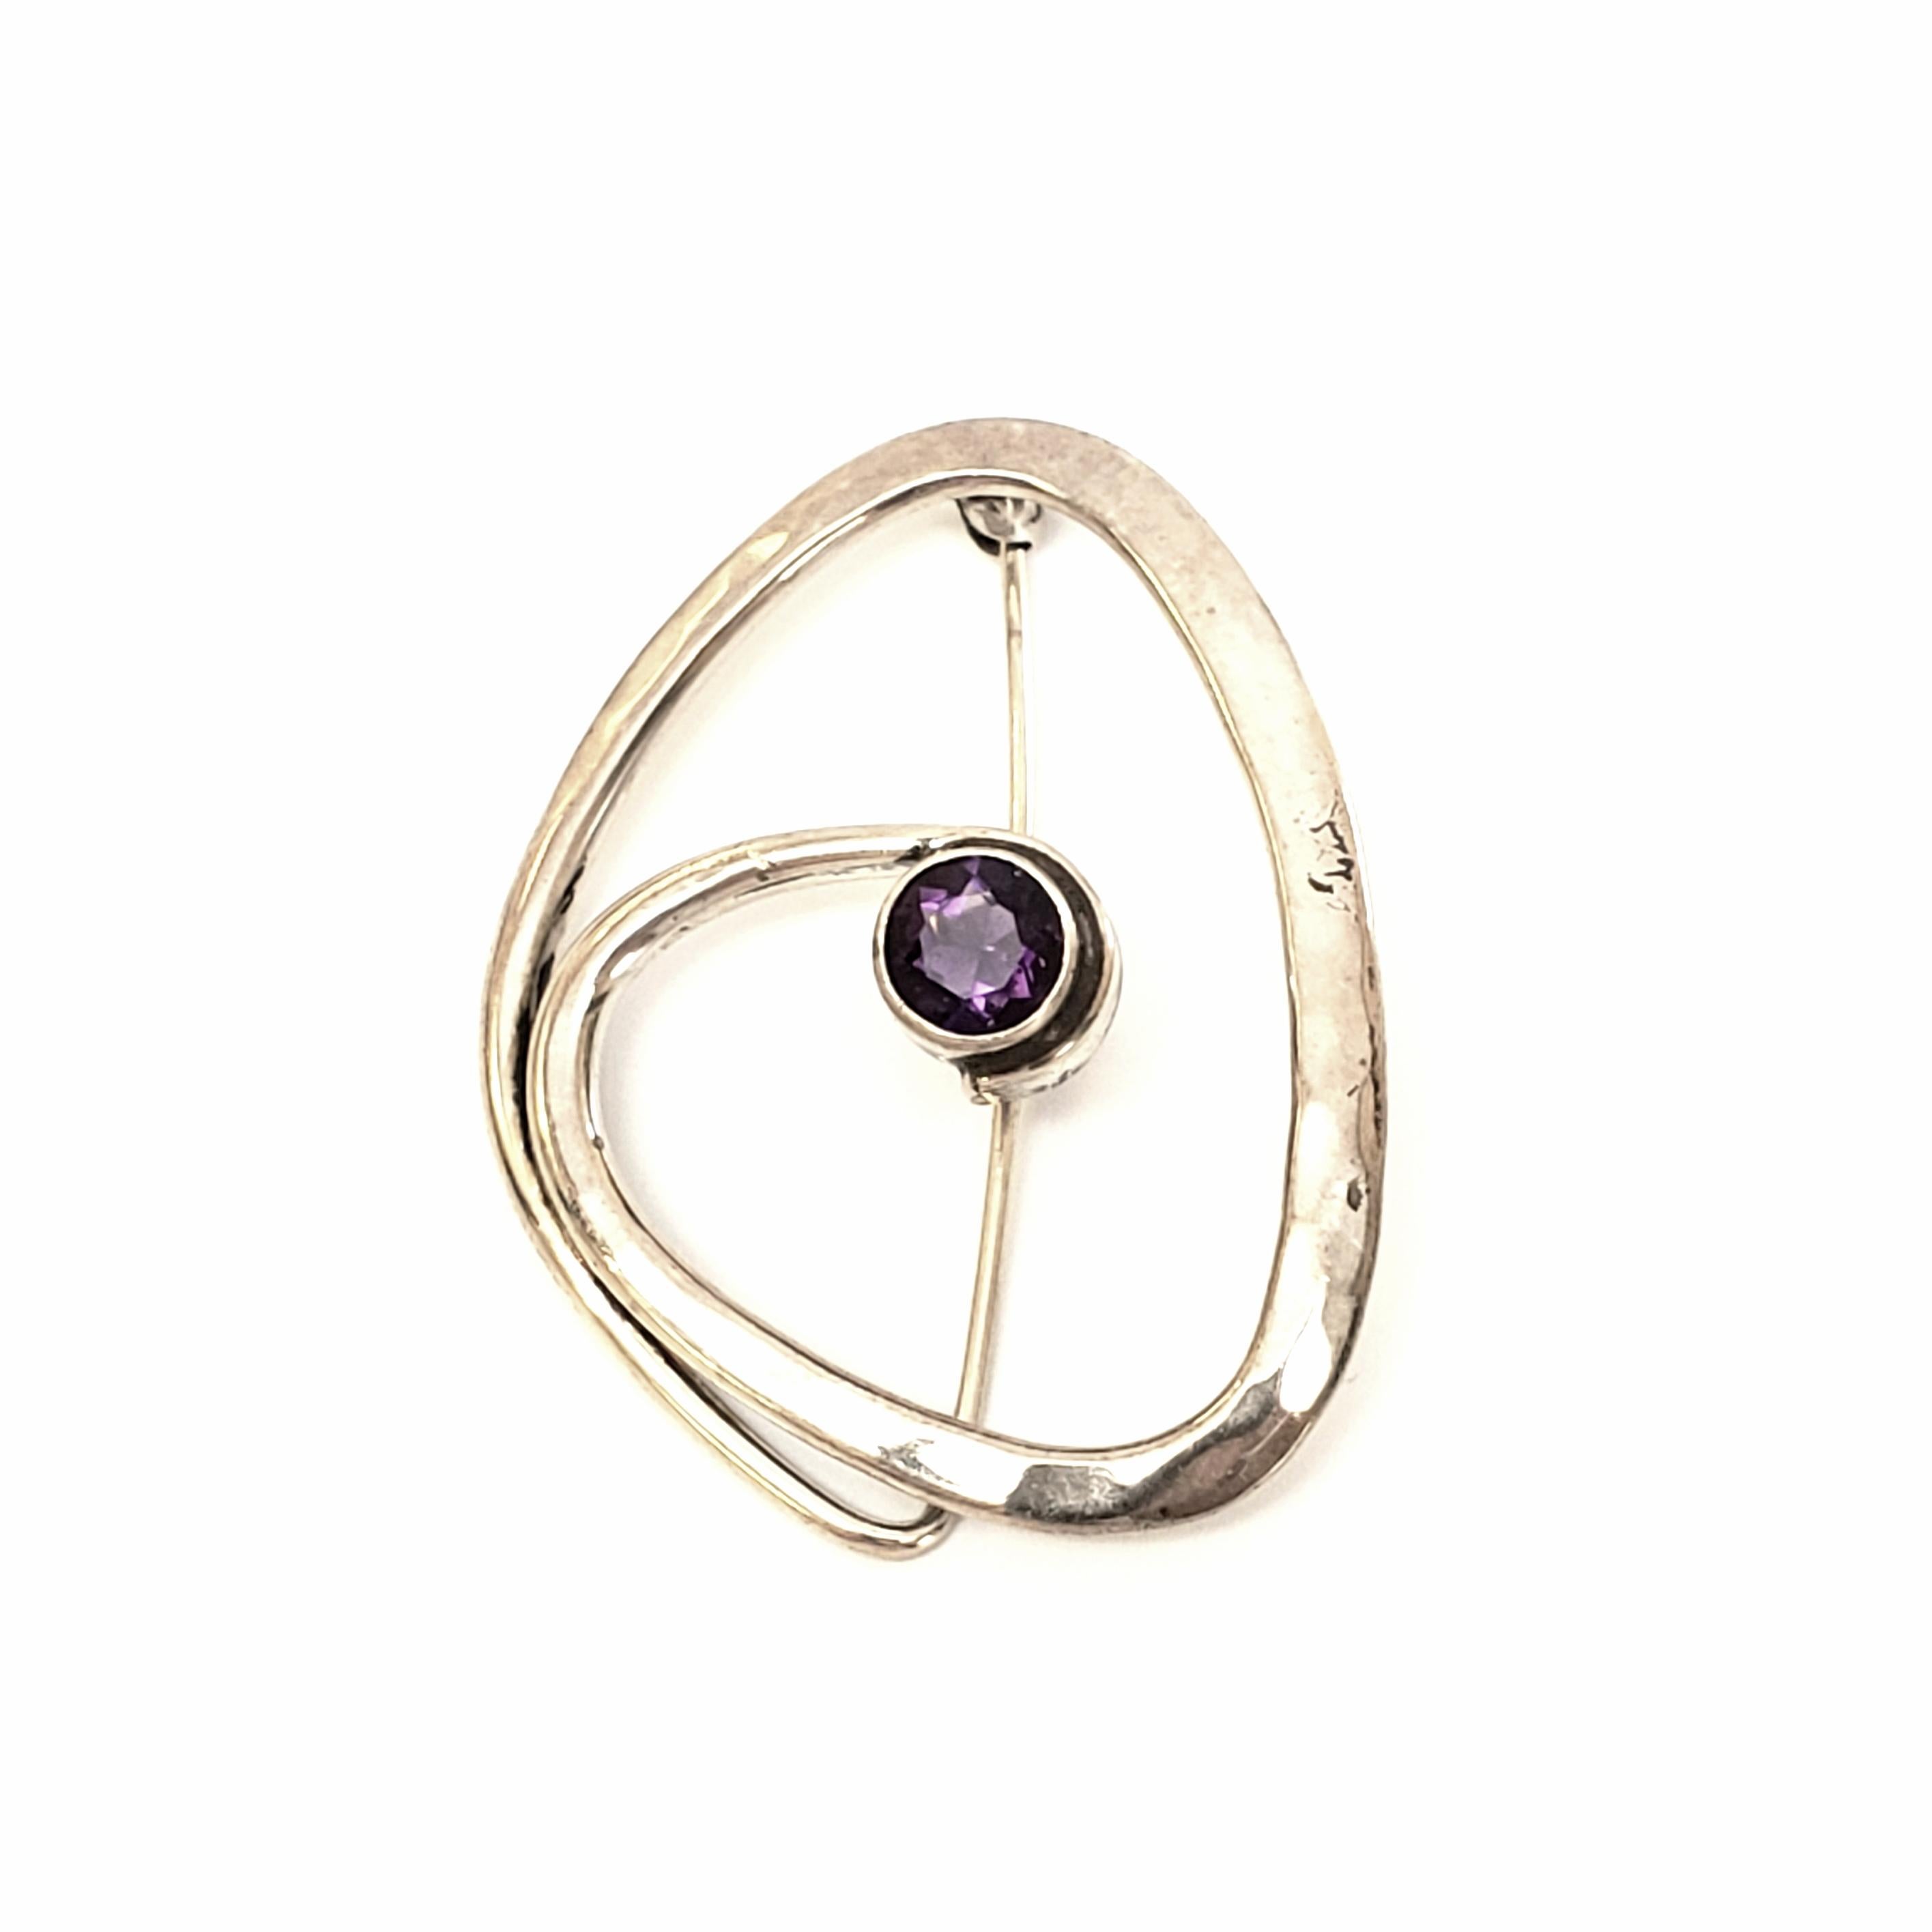 Sterling silver and amethyst pin designed by Ed Levin.

Highly sought after designer, Ed Levin, is known for making wearable art. This modernist design is slightly hammered and features a round, faceted, bezel set amethyst at its center.

Measures 1